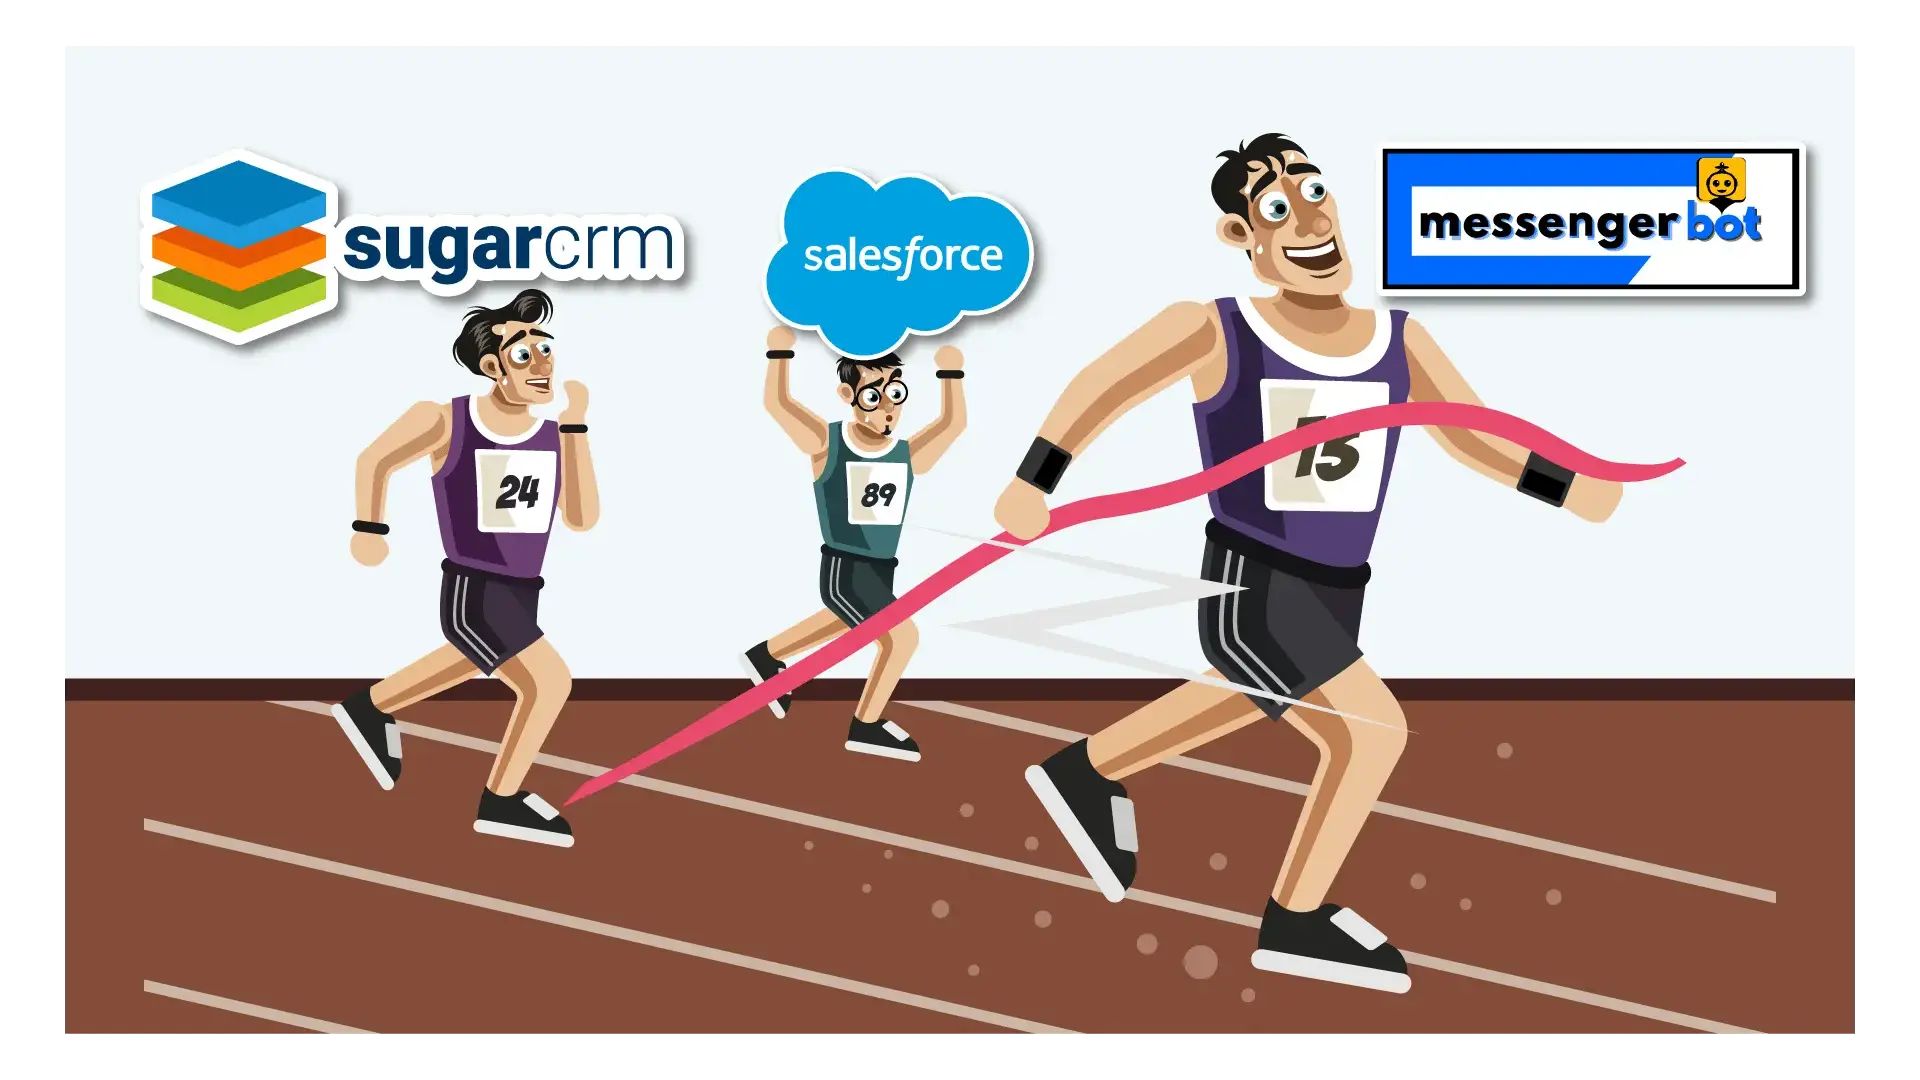 sugarcrm vs salesforce, Marketing, Marketing automation, CRM, Comparison, Which is better, contact management, Features, Configurability, social media integration